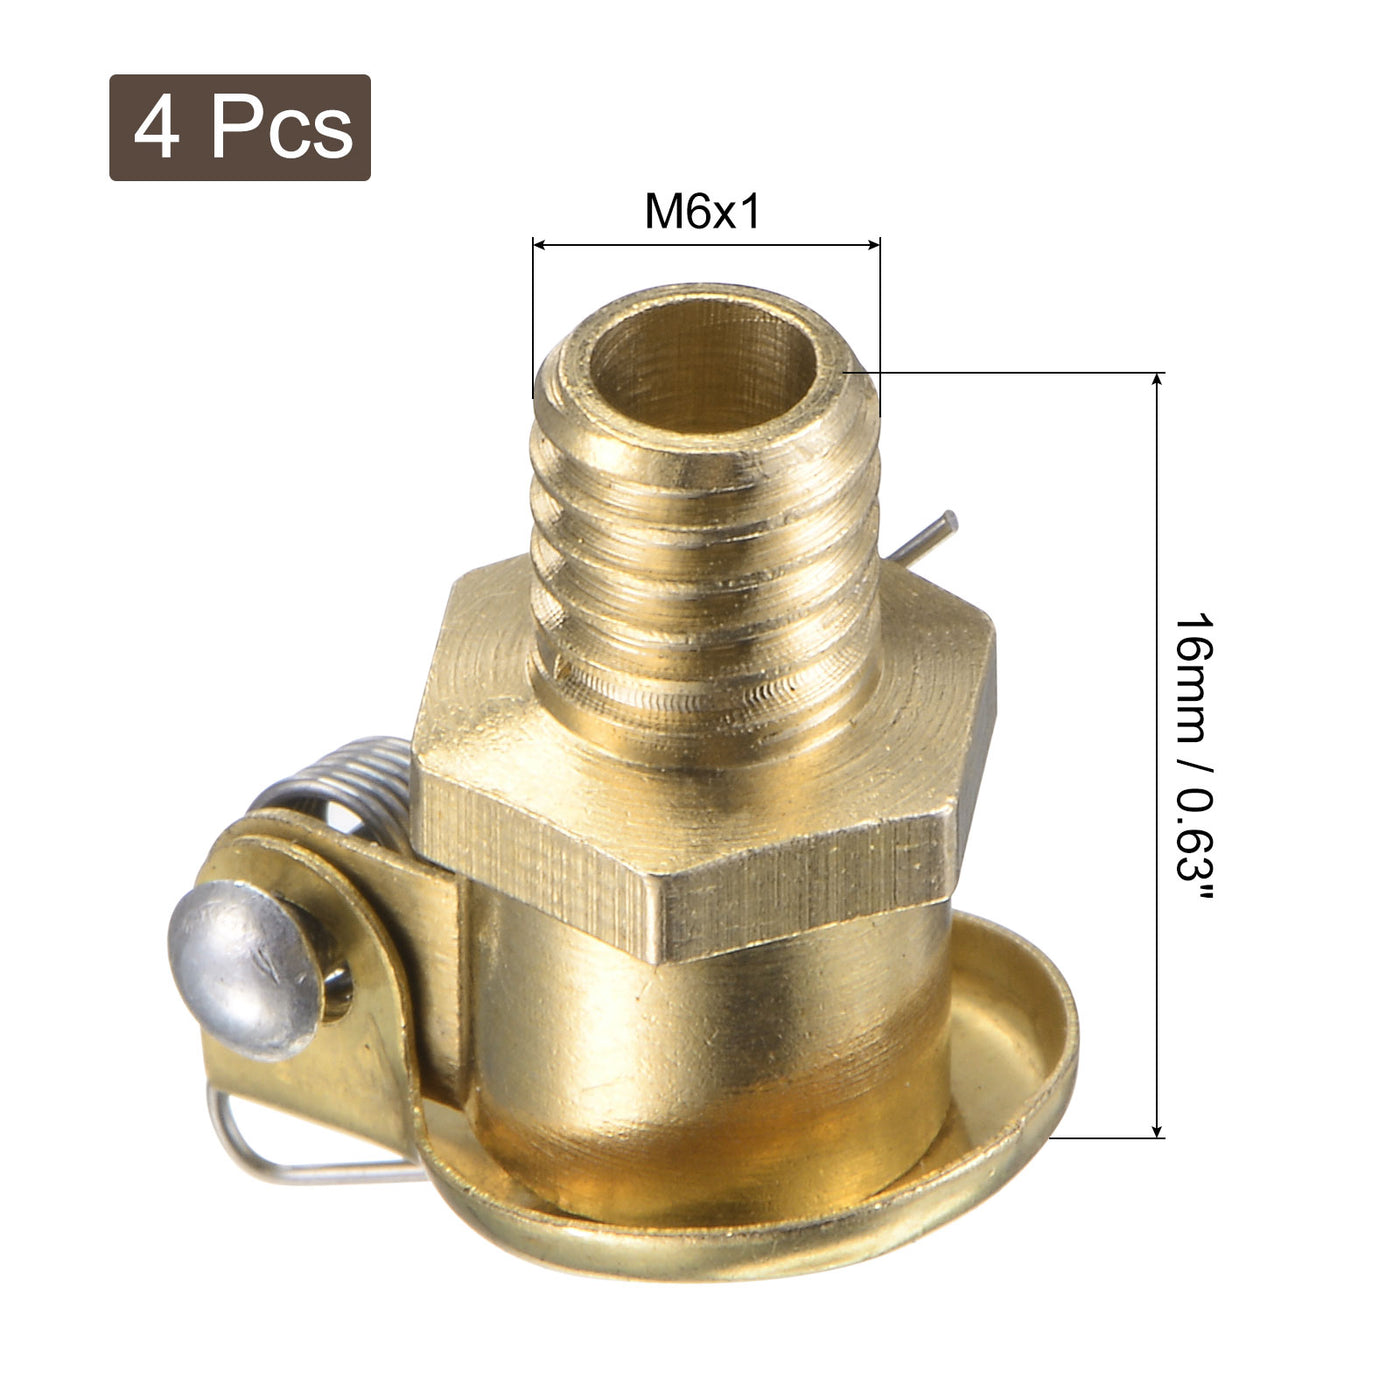 Uxcell Uxcell Spring Grease Oil Cup Cap M6x1 Male Thread Copper Machine Parts 4Pcs